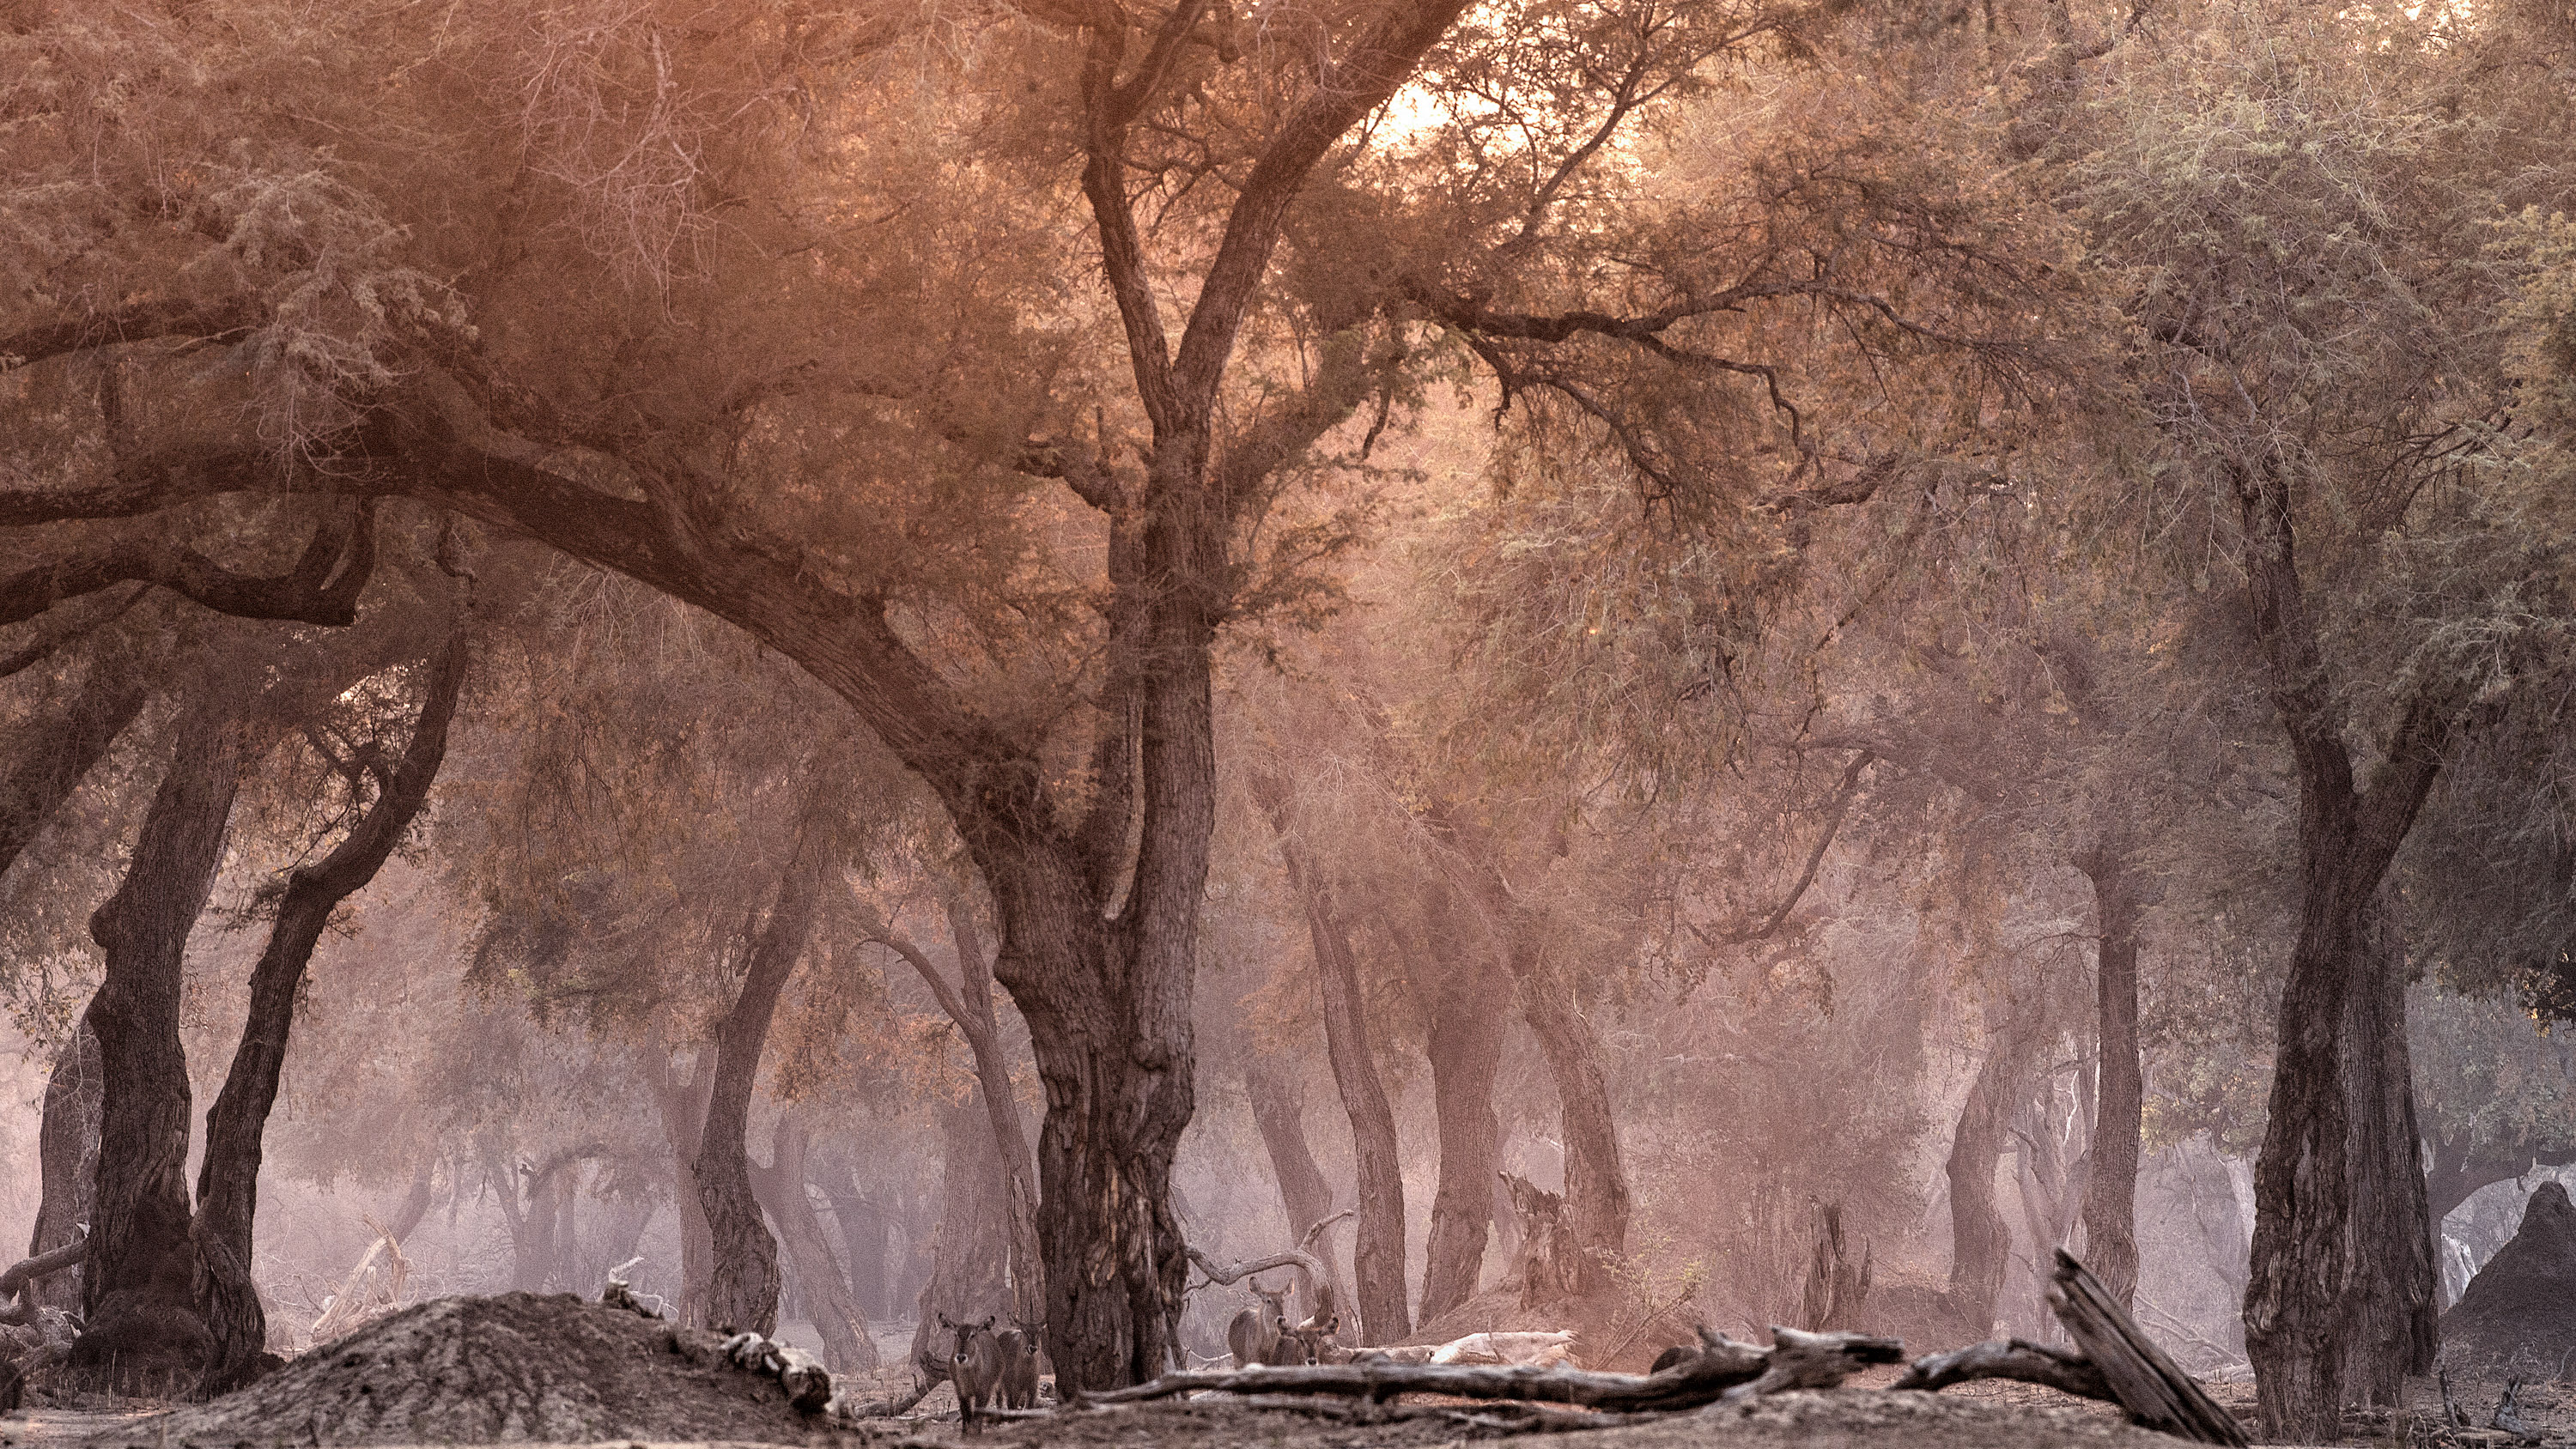 A forest scene at dawn with a few waterbuck under the trees at Mana Pools National Park, Zimbabwe